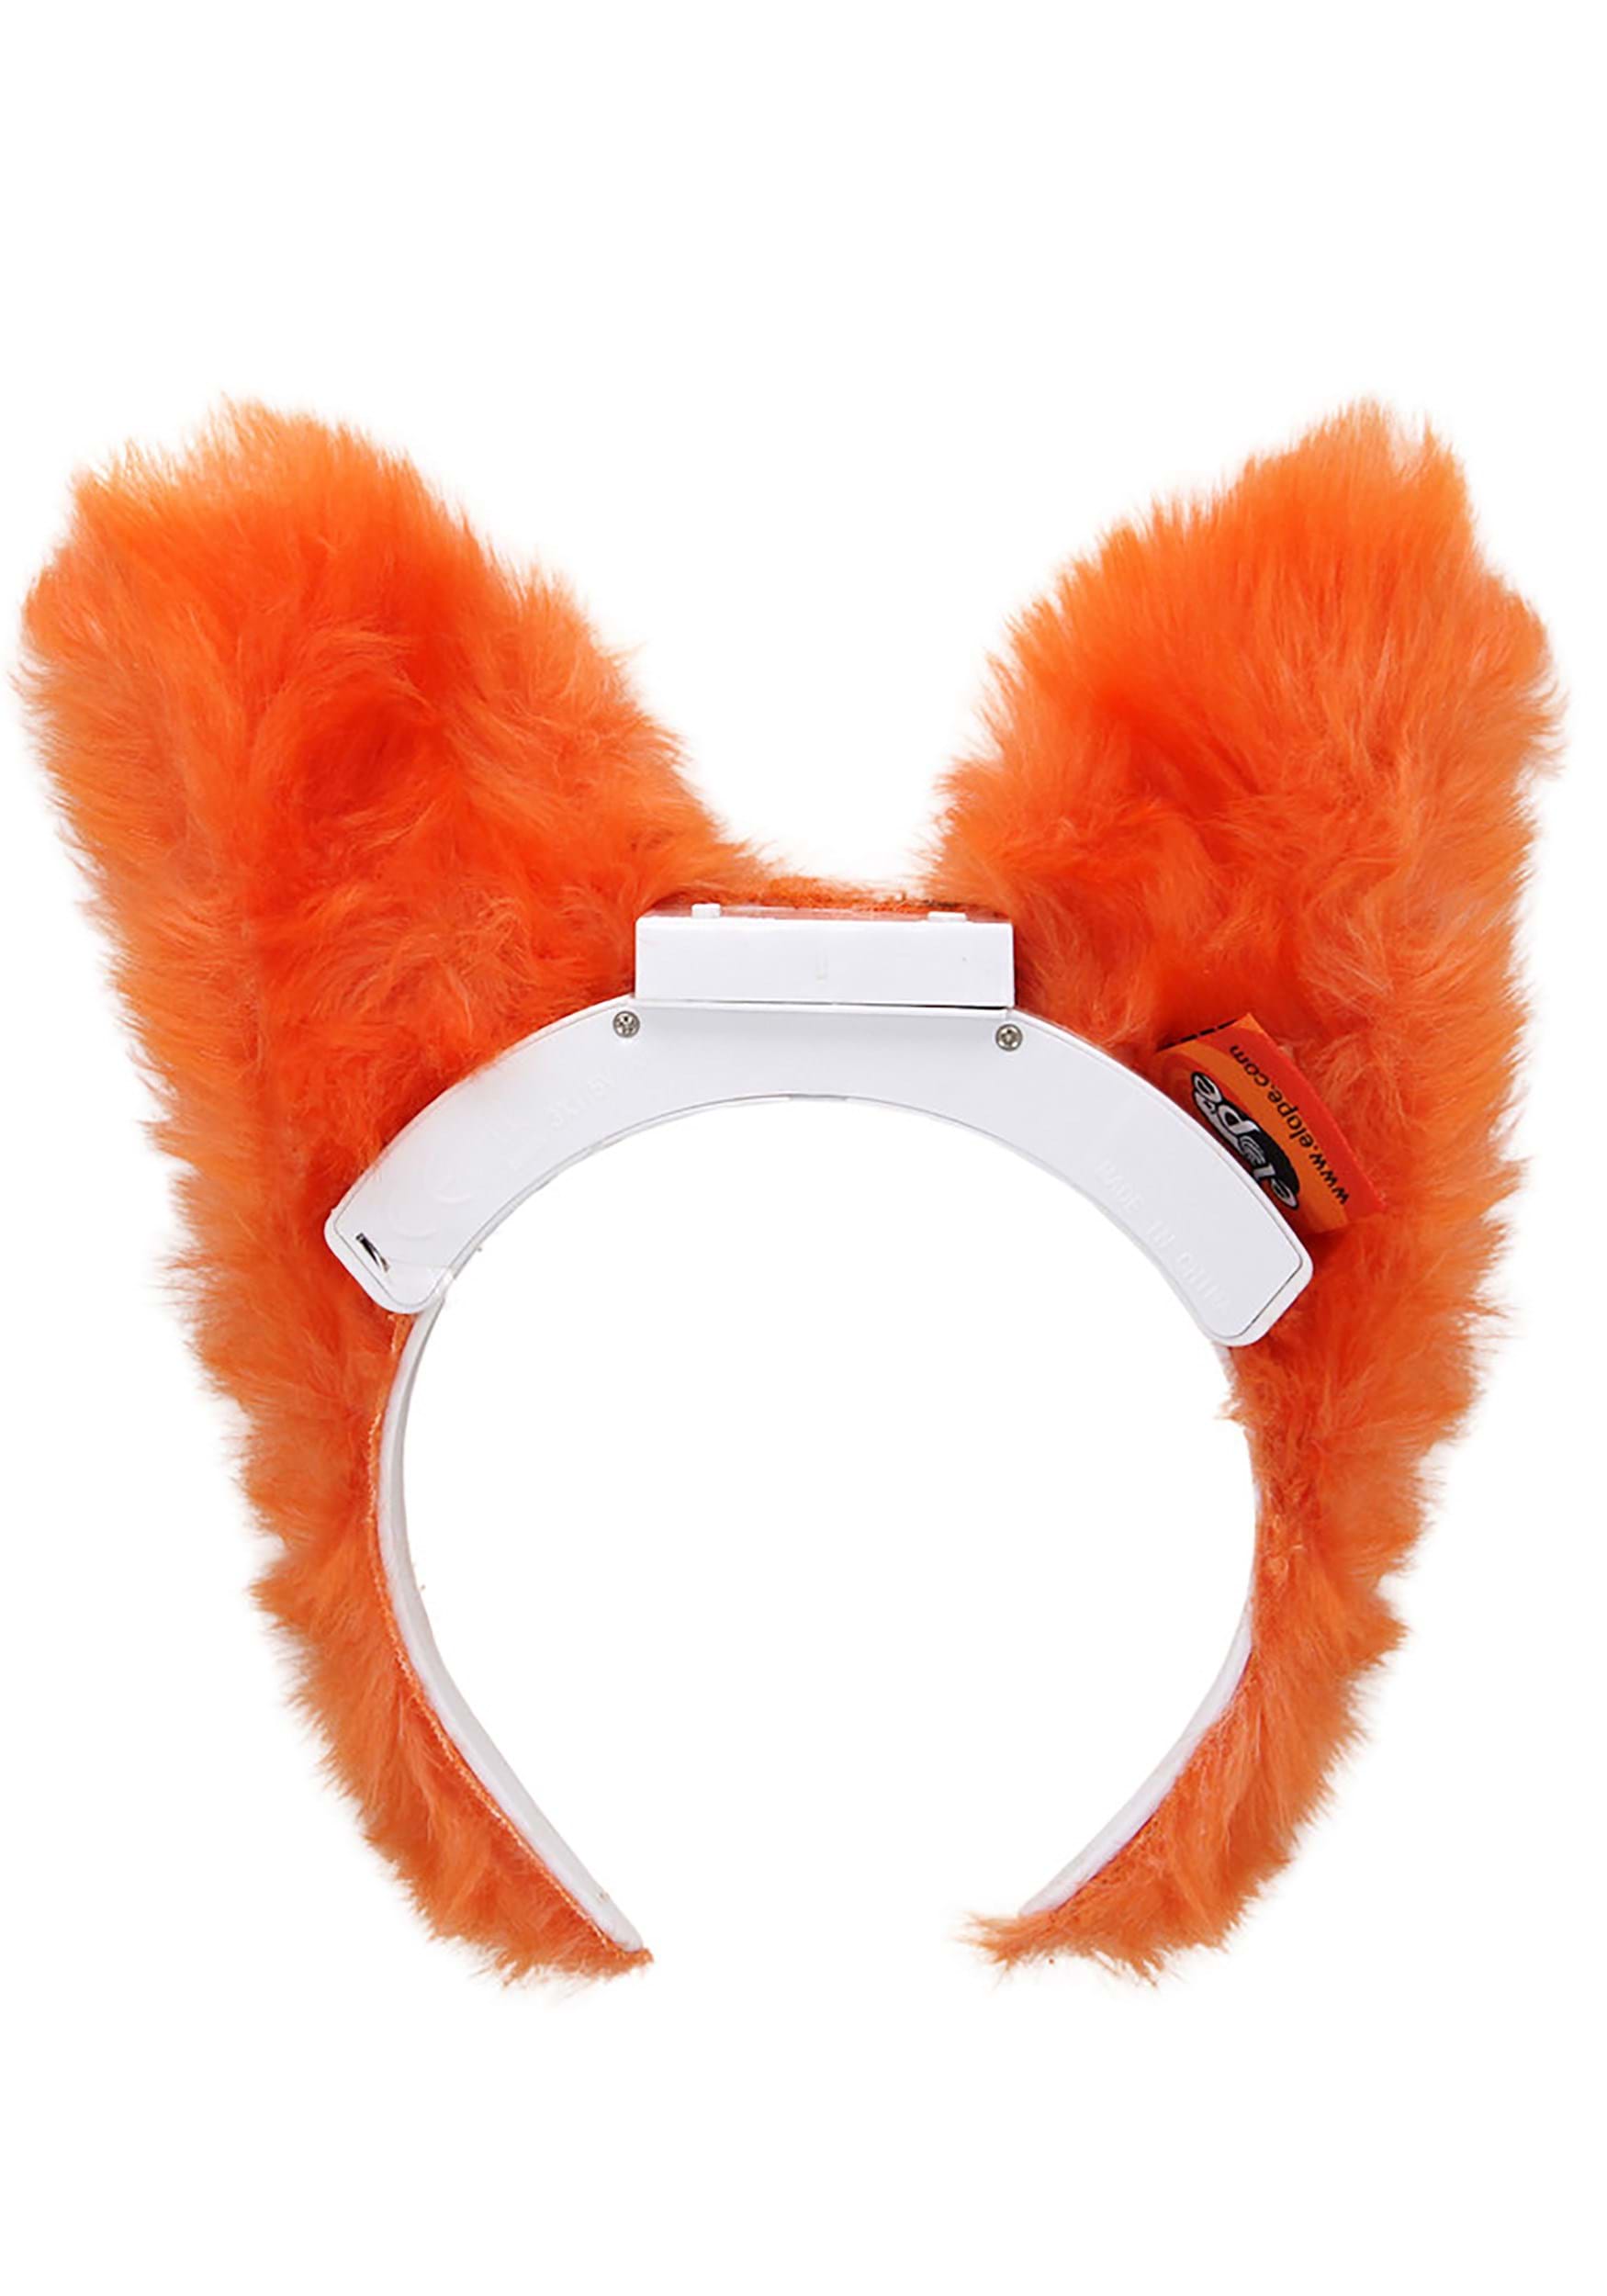 Moving Fox Ears Costume Headband , Sound Activated